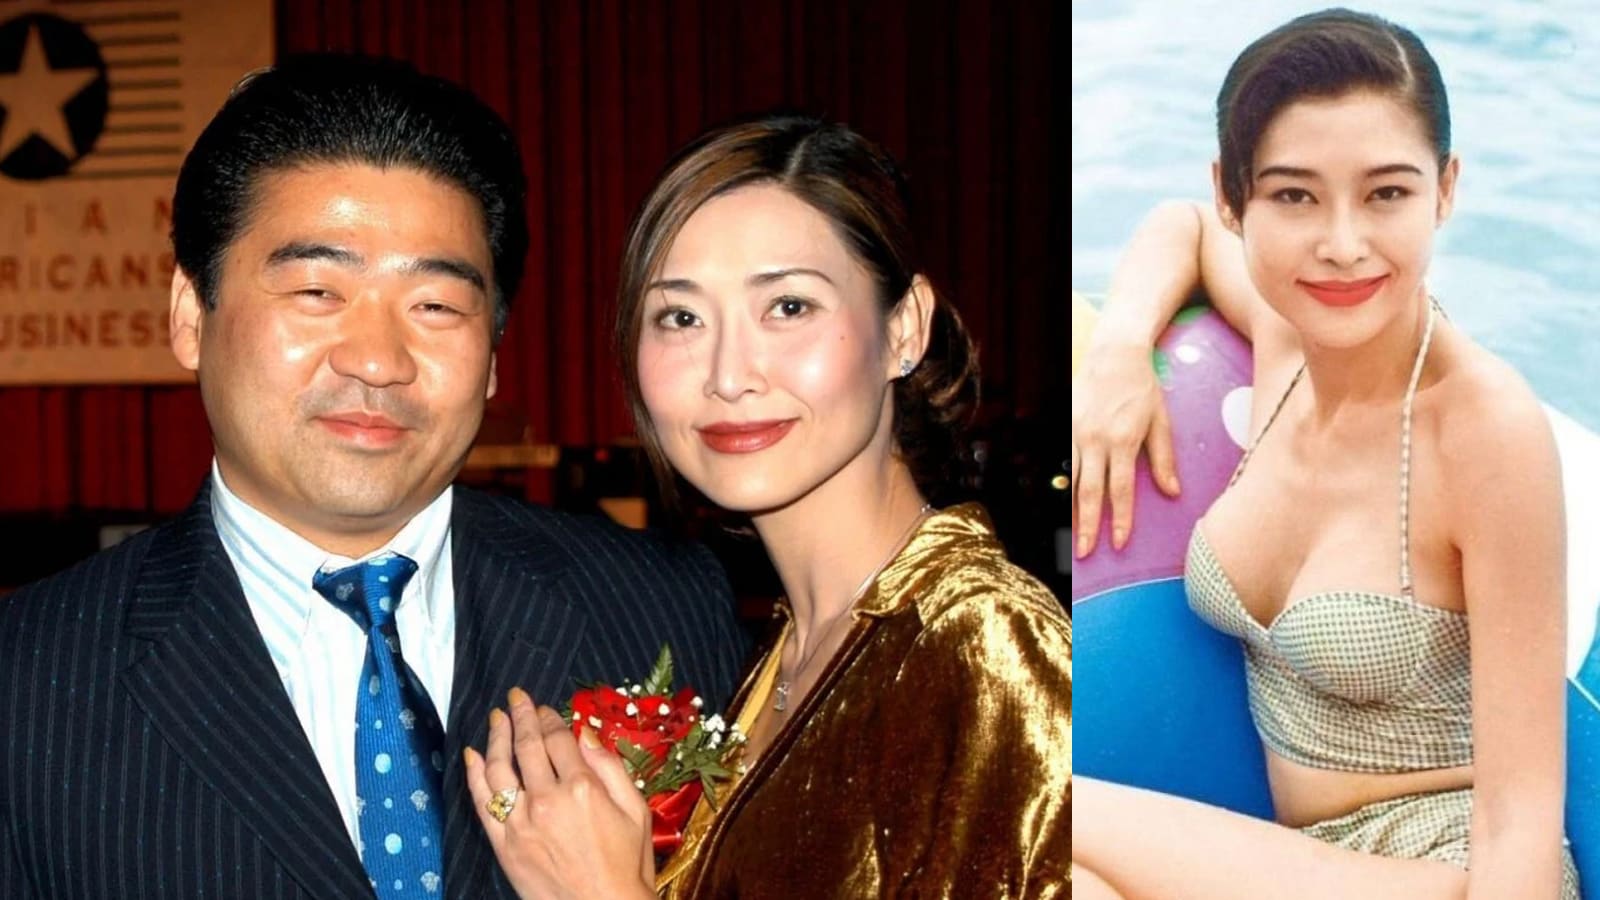 Veronica Yip's Billionaire Husband Files For Bankruptcy, She Says It's "Not A Big Deal"